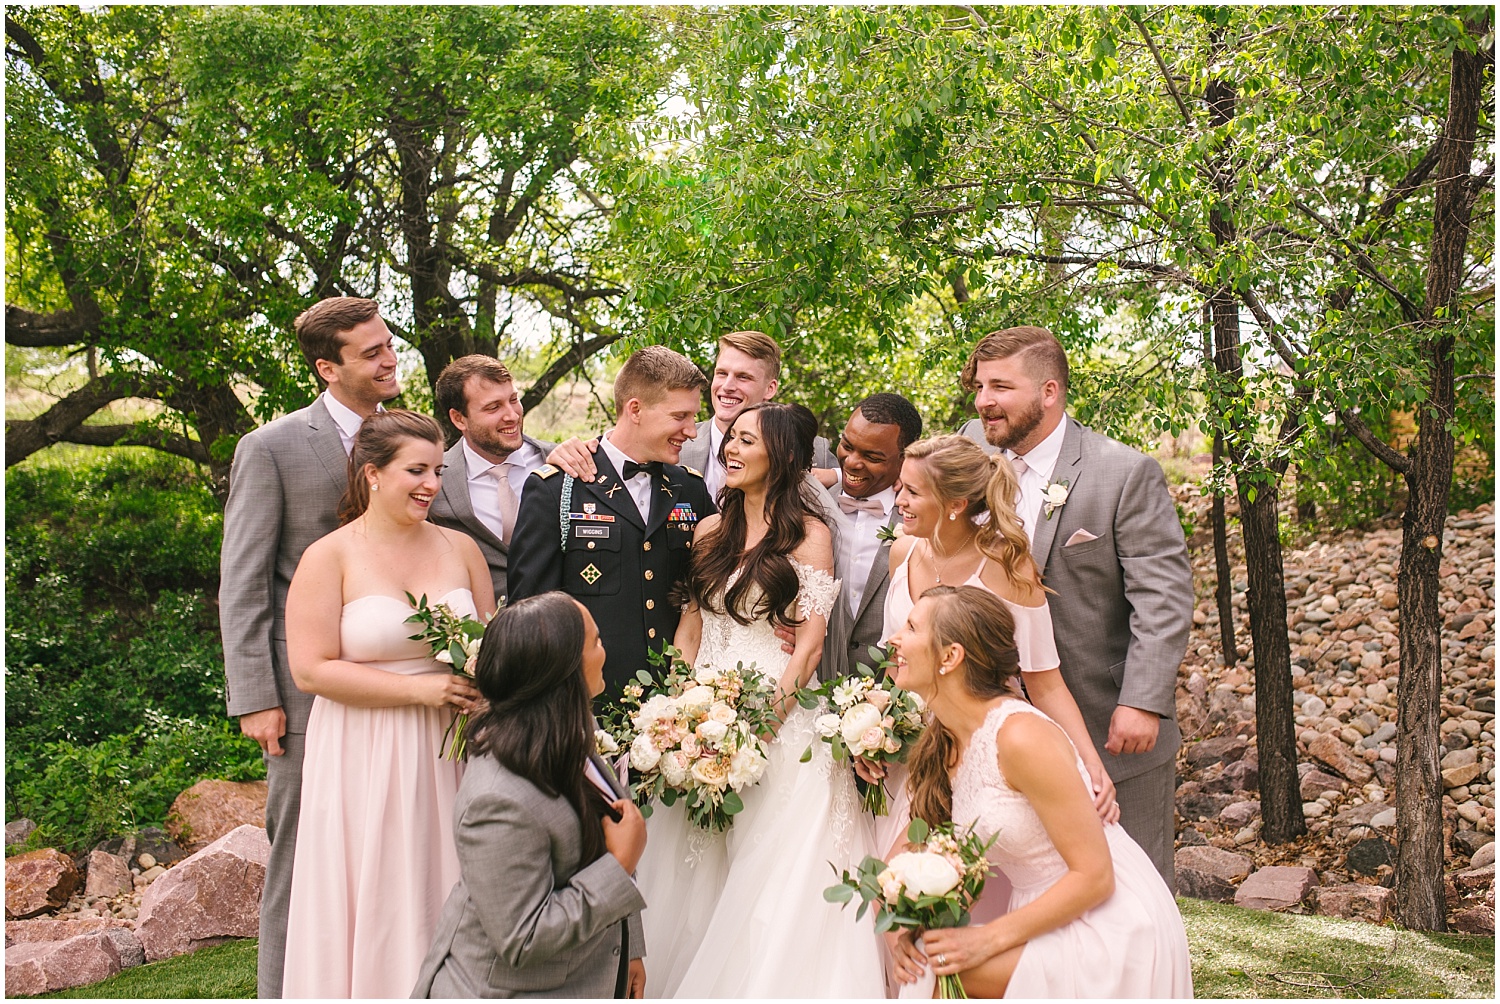 Wedding party surrounds the bride and groom with love at Creekside Event Center wedding